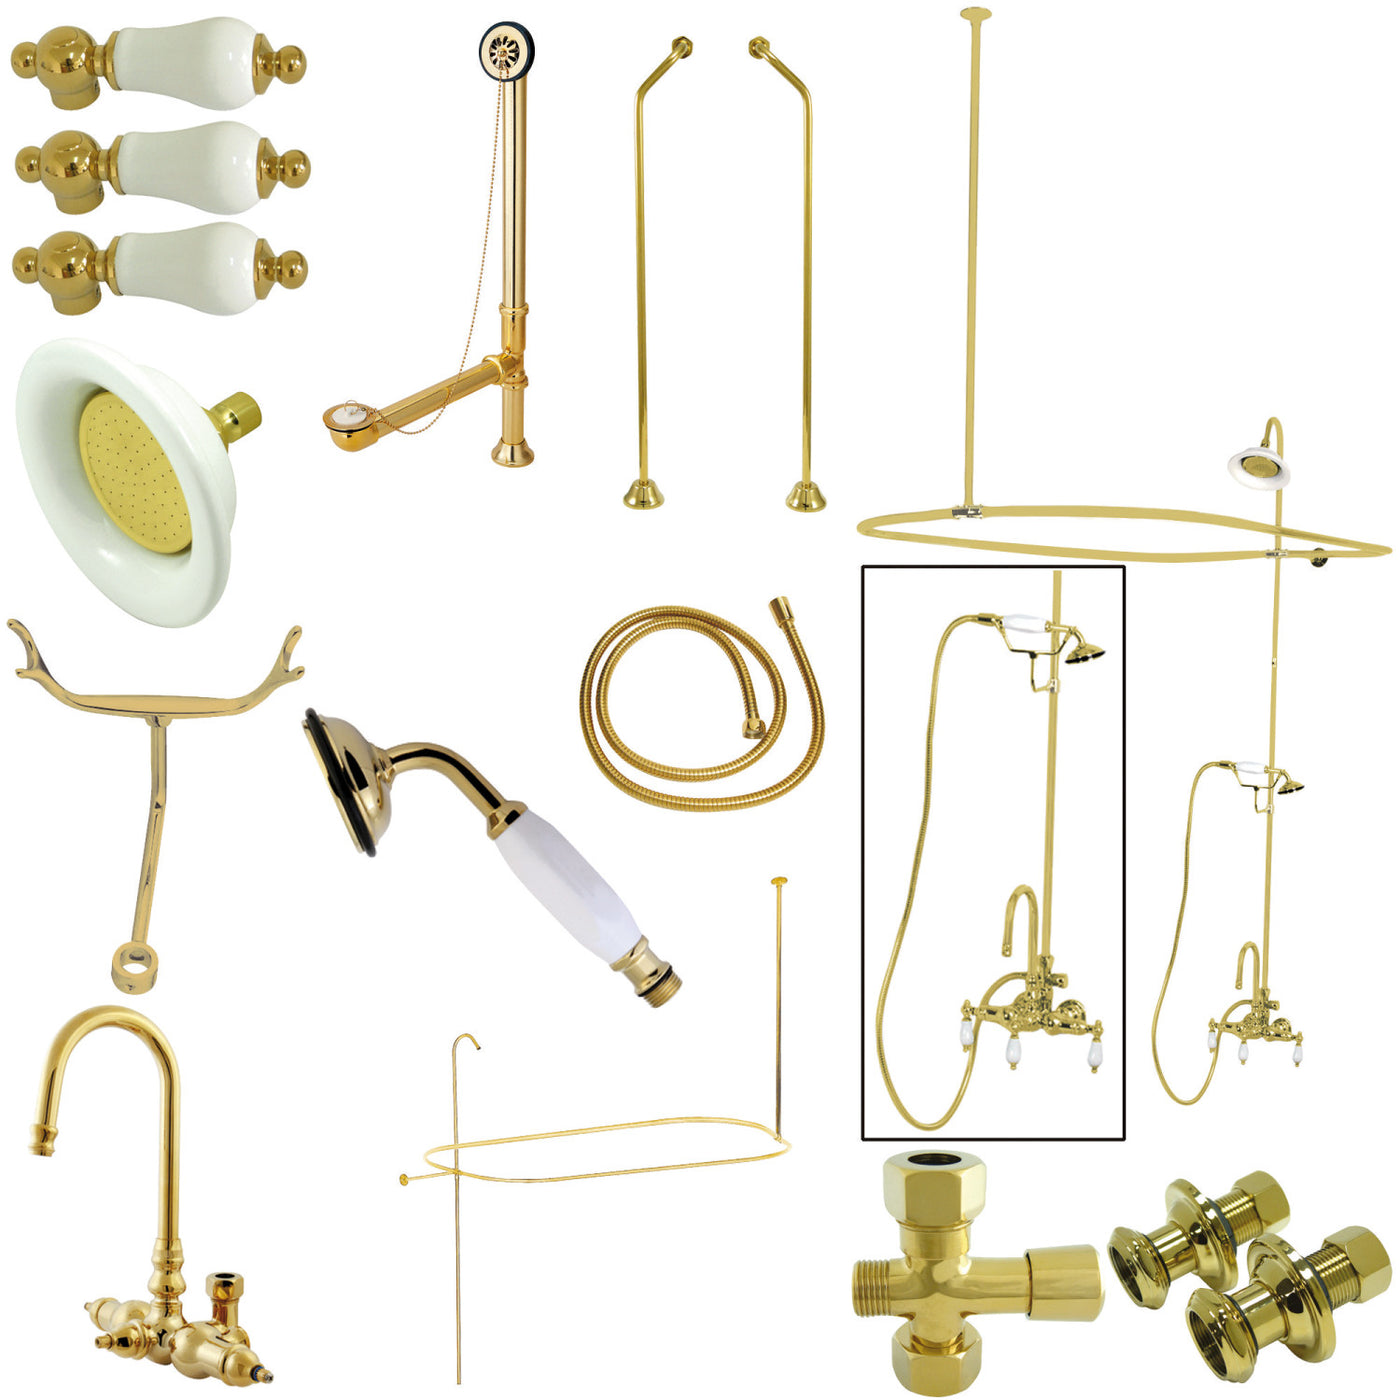 Elements of Design EDK2182PL High-Arc Gooseneck Clawfoot Tub Faucet Package, Polished Brass